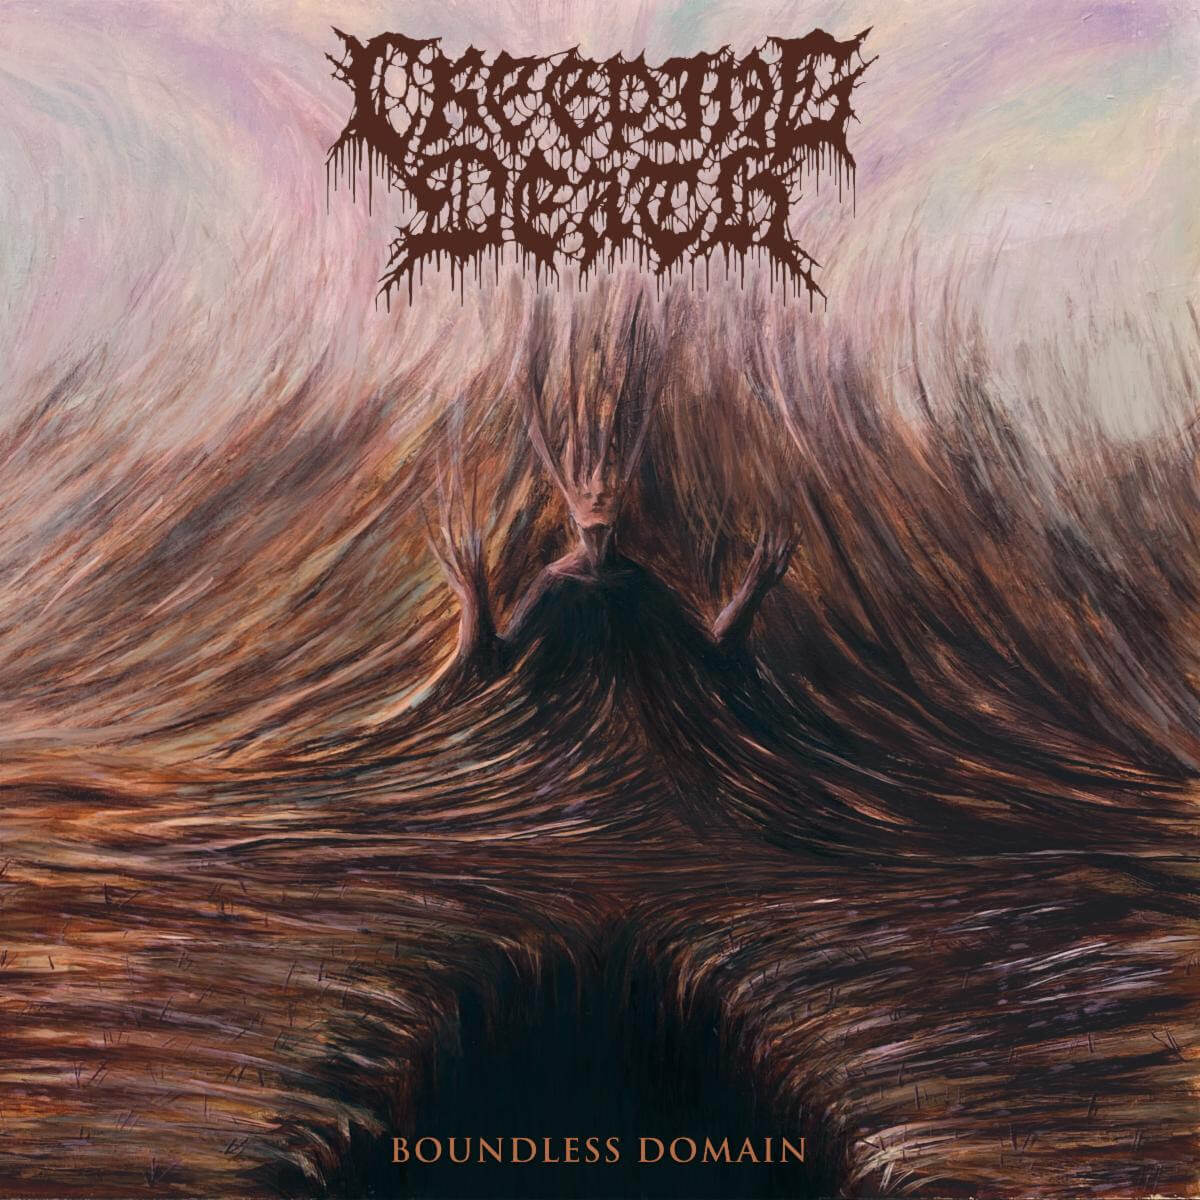 Boundless Domain by Creeping Death album review. The Texas band's full-length drops on June 16th vi MNRK Heavy and DSPs